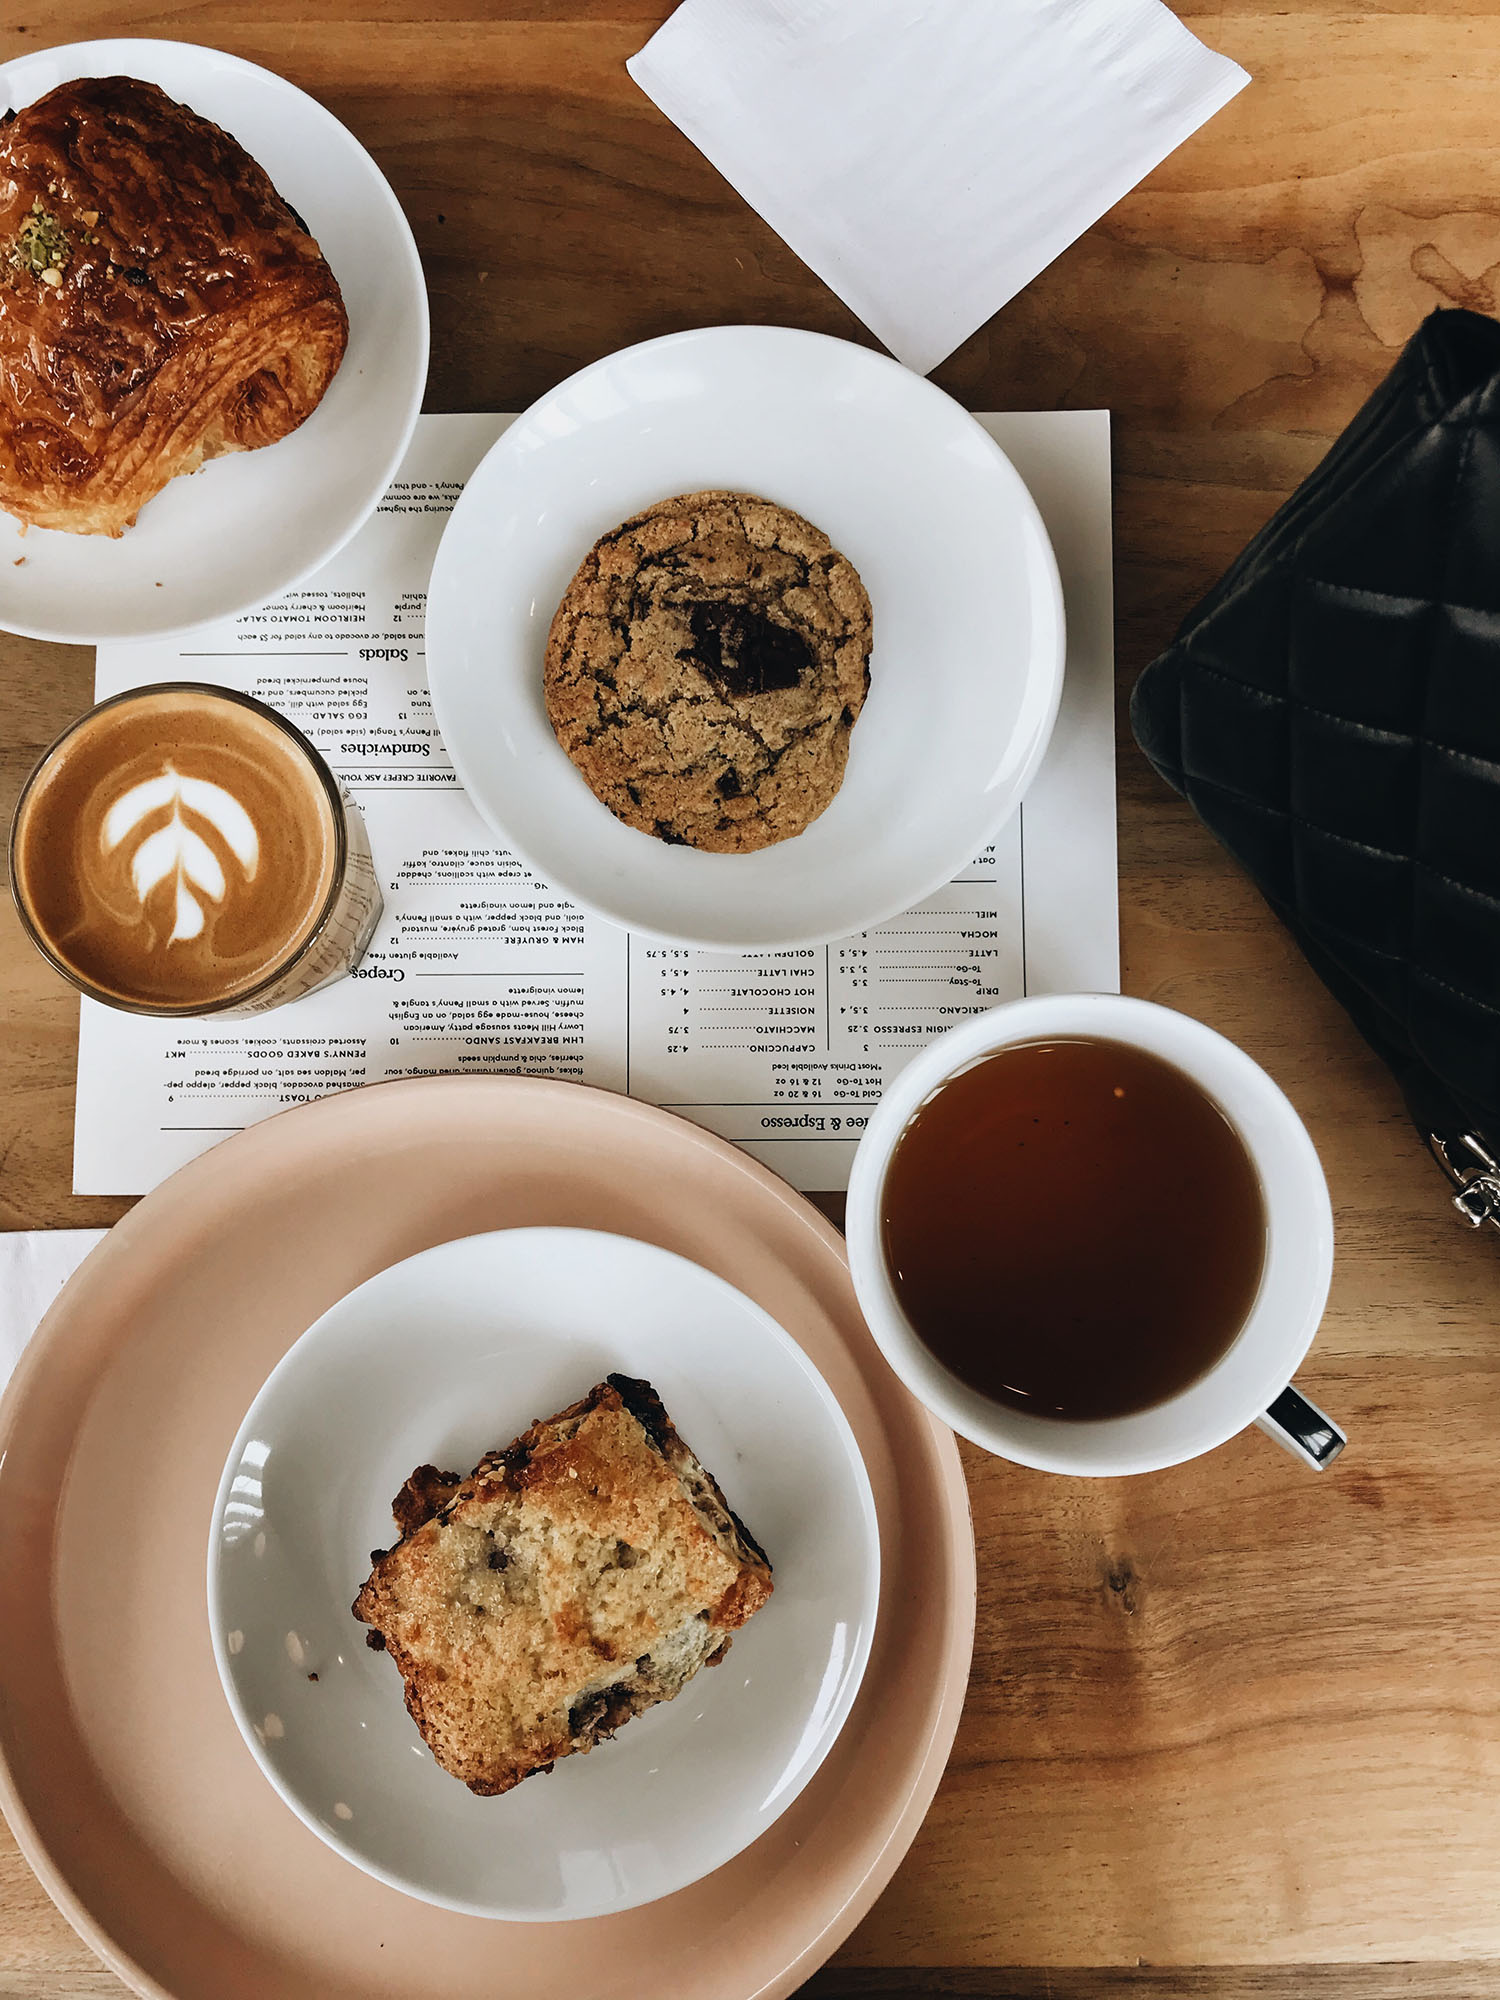 Tea and pastries at Penny's Coffee in downtown Minneapolis, as captured by top Canadian travel blogger Cee Fardoe of Coco & Vera